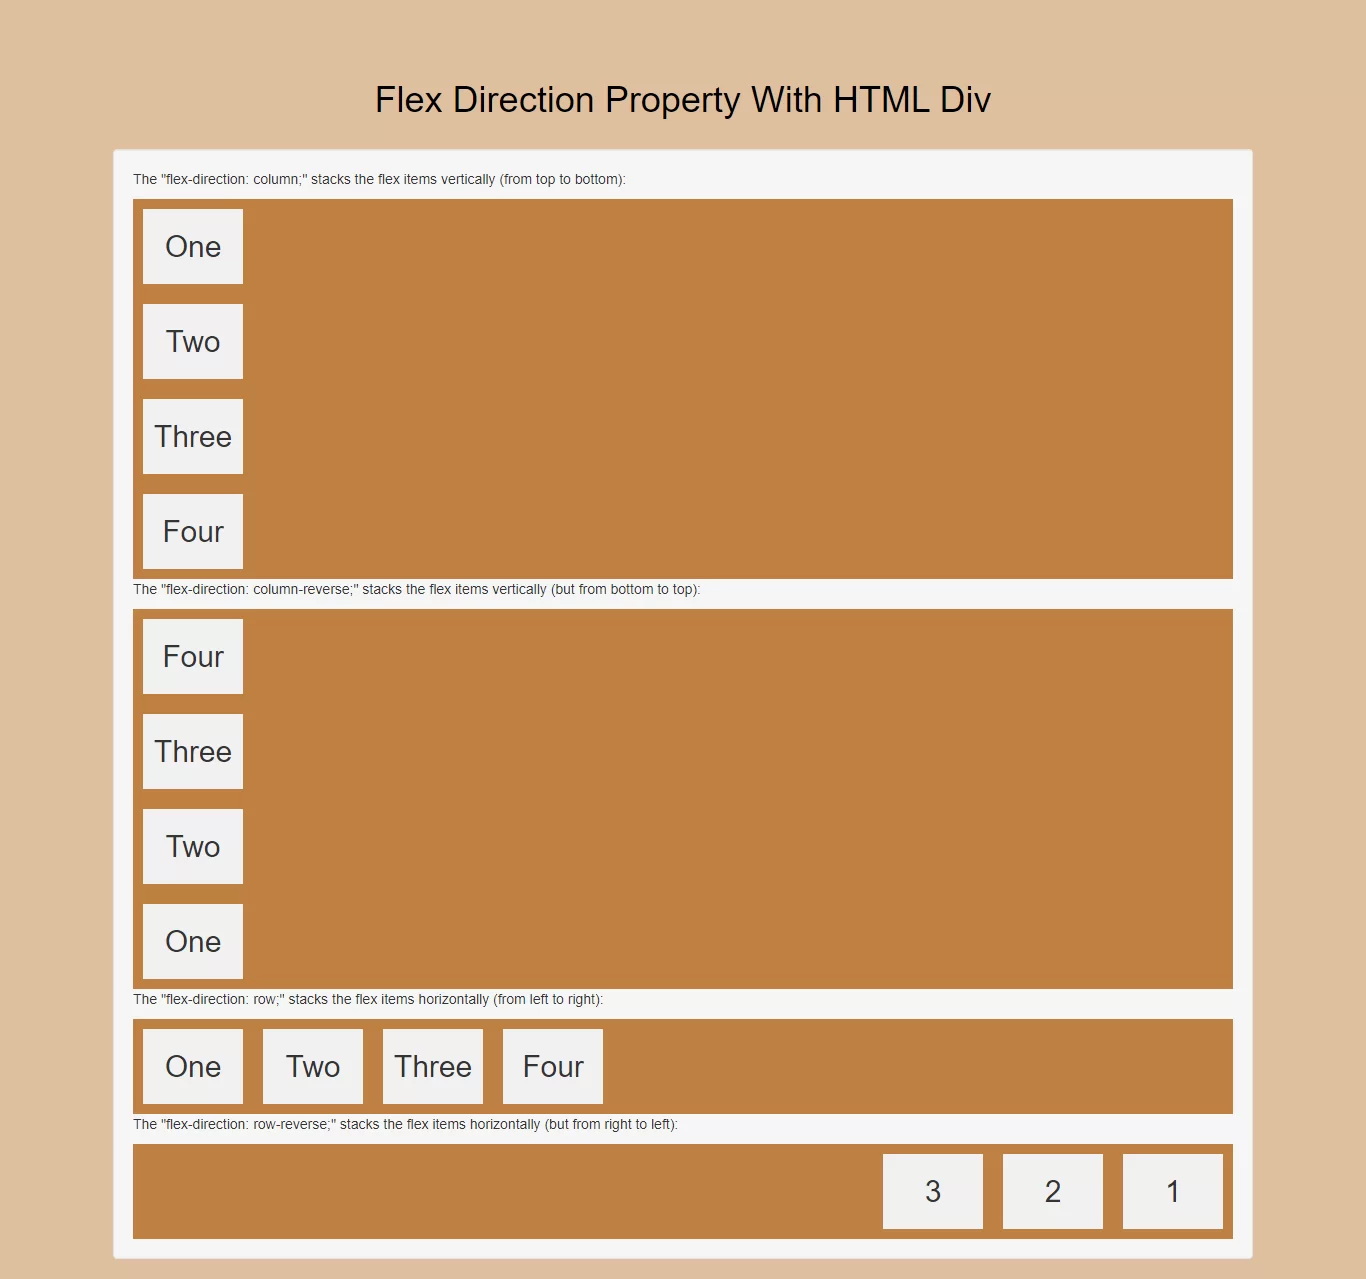 How Do I Use Flex Direction Property With HTML Div